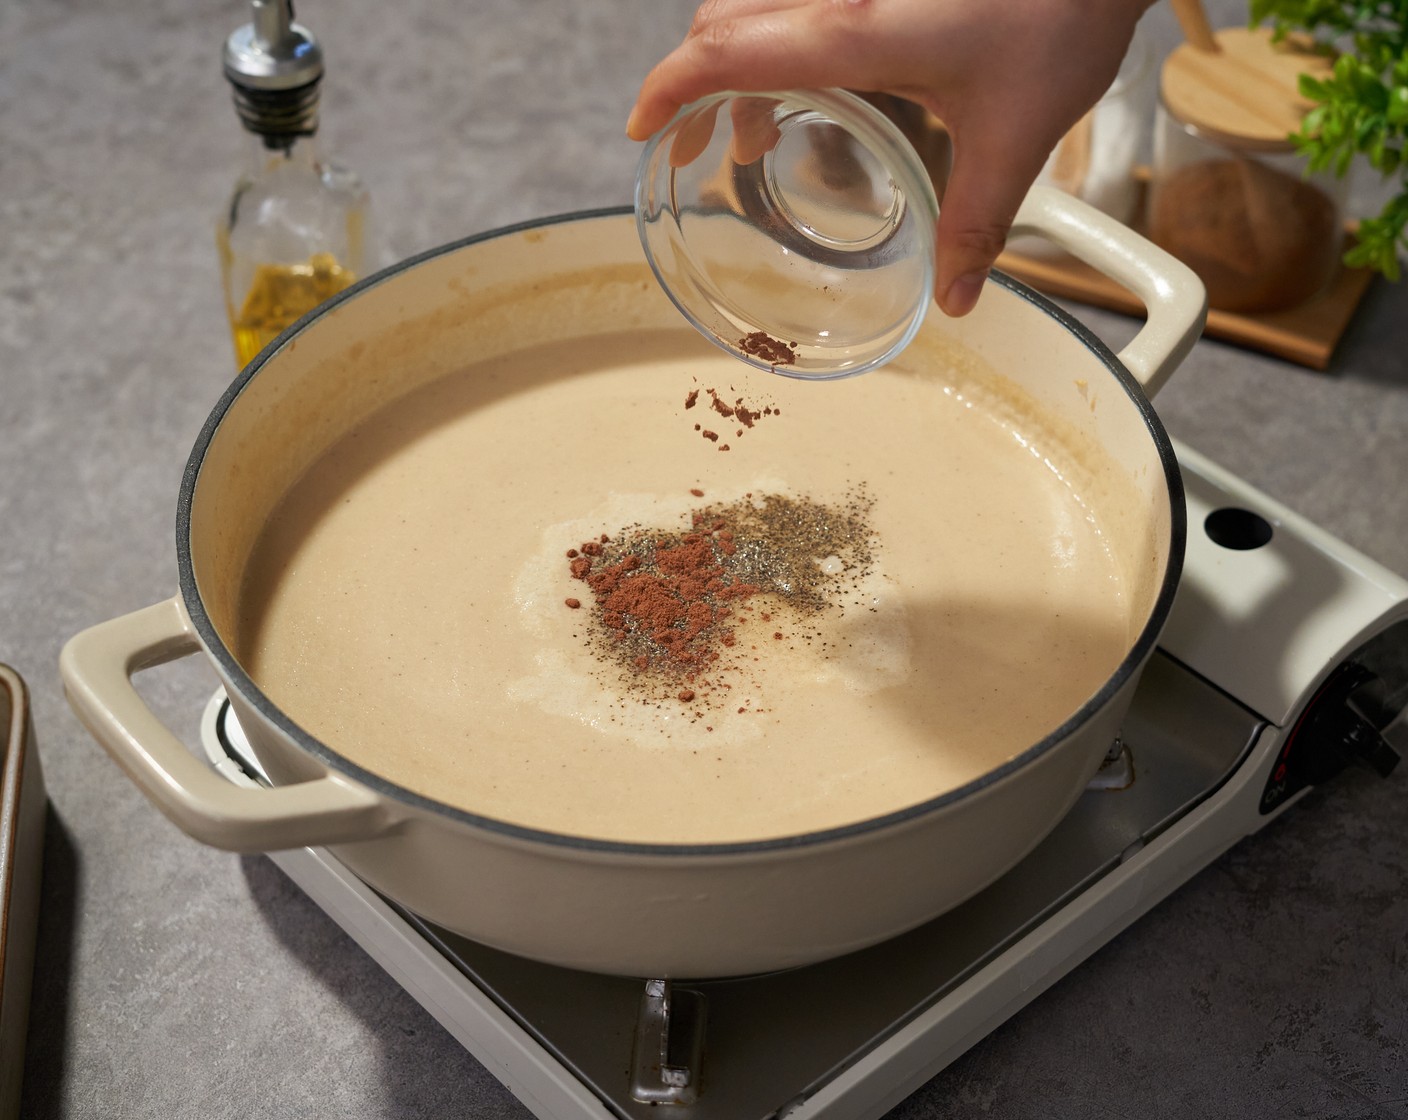 step 6 Add Heavy Cream (1/2 cup) and mix well combined. Cook over medium-low heat for 2-3 minutes more. Then season with Salt (1/4 tsp), Ground Black Pepper (1/2 tsp), and Ground Nutmeg (1/4 tsp). Stir to combine.